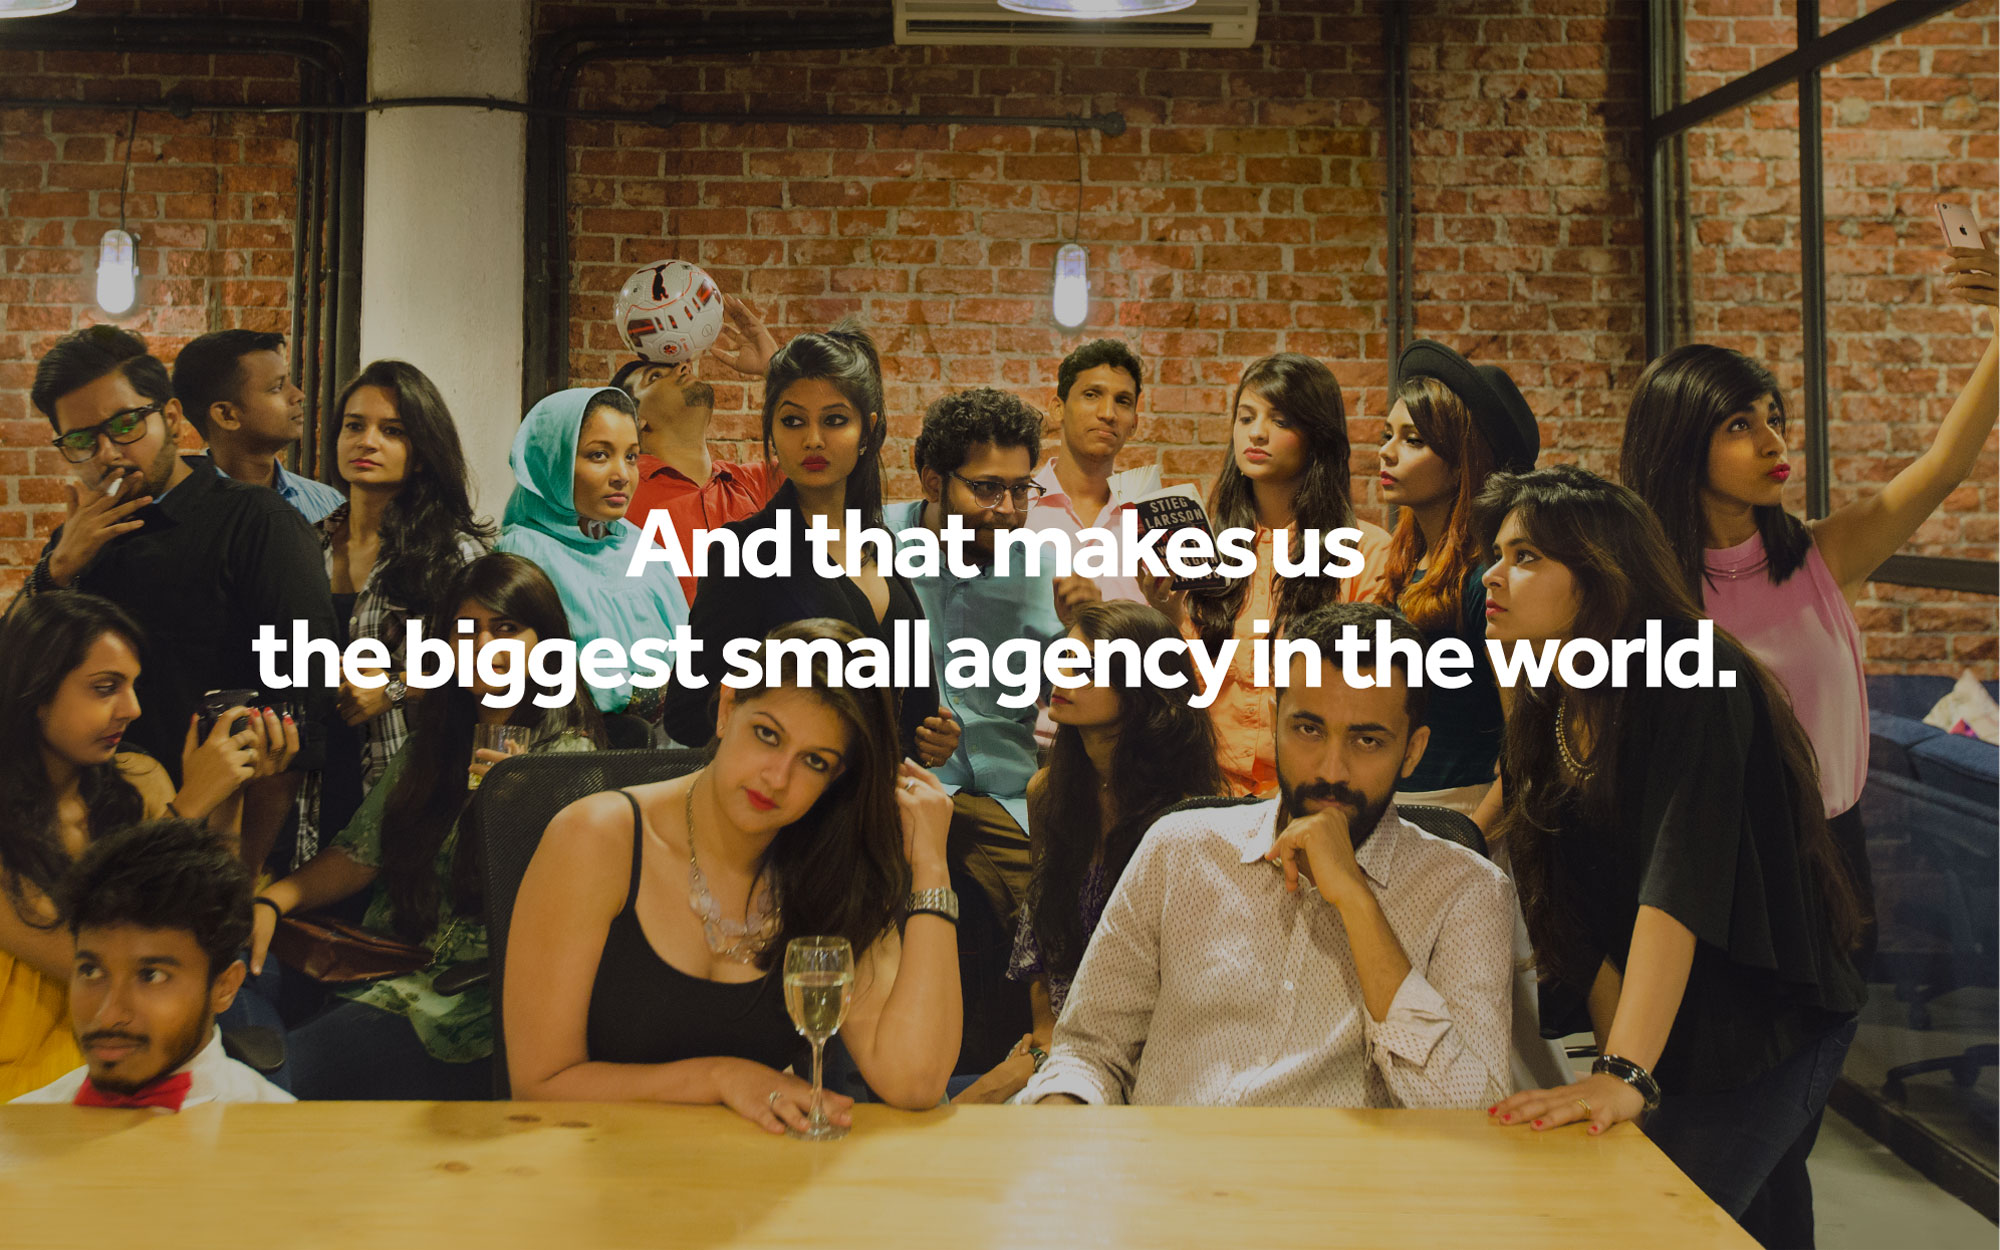 And that makes us the biggest small agency in the world.